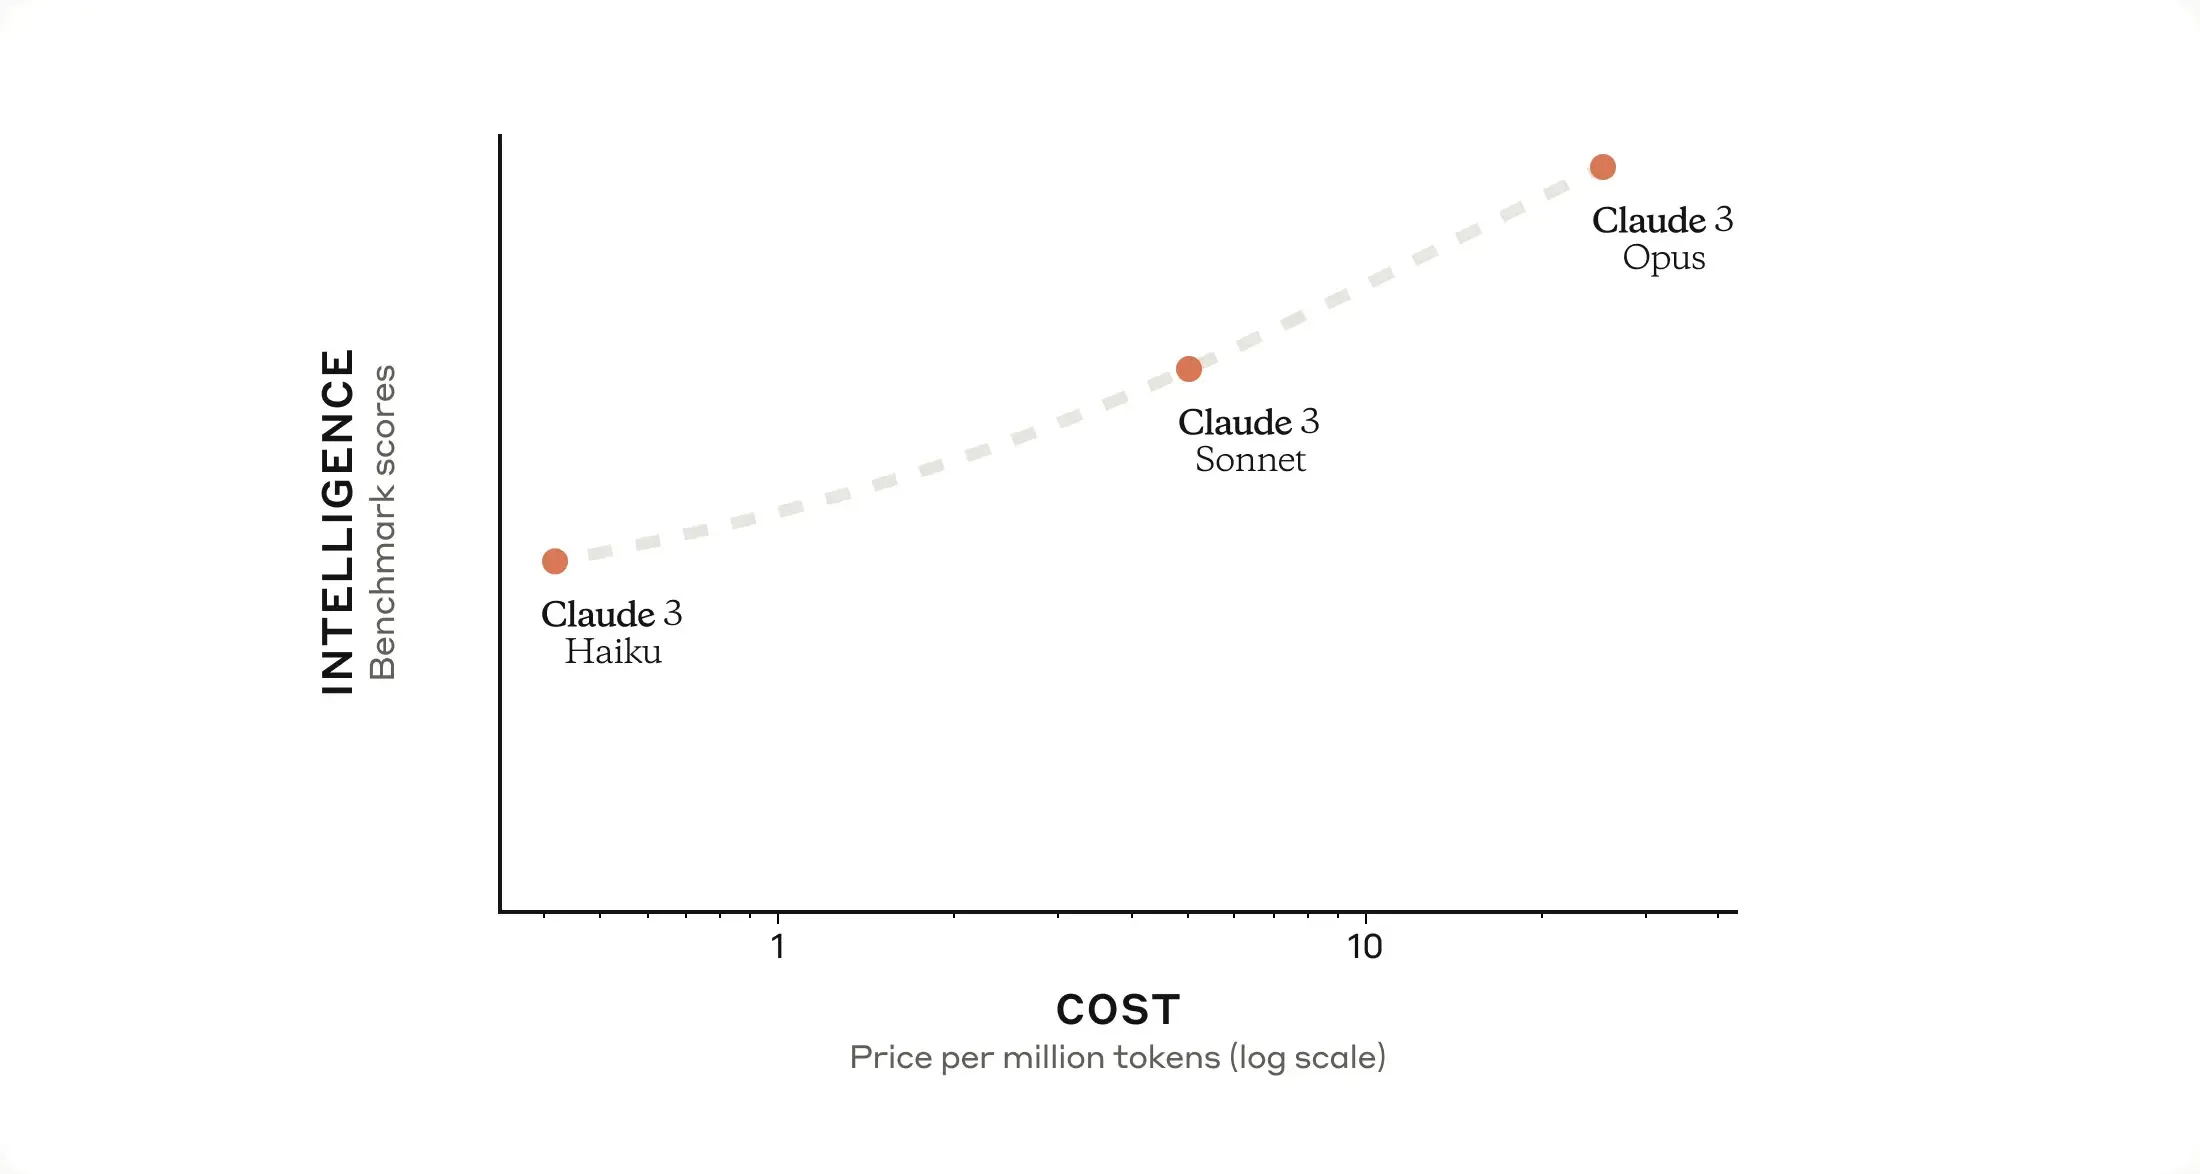 Comparison of the three Claude 3 models in terms of intelligence and cost.